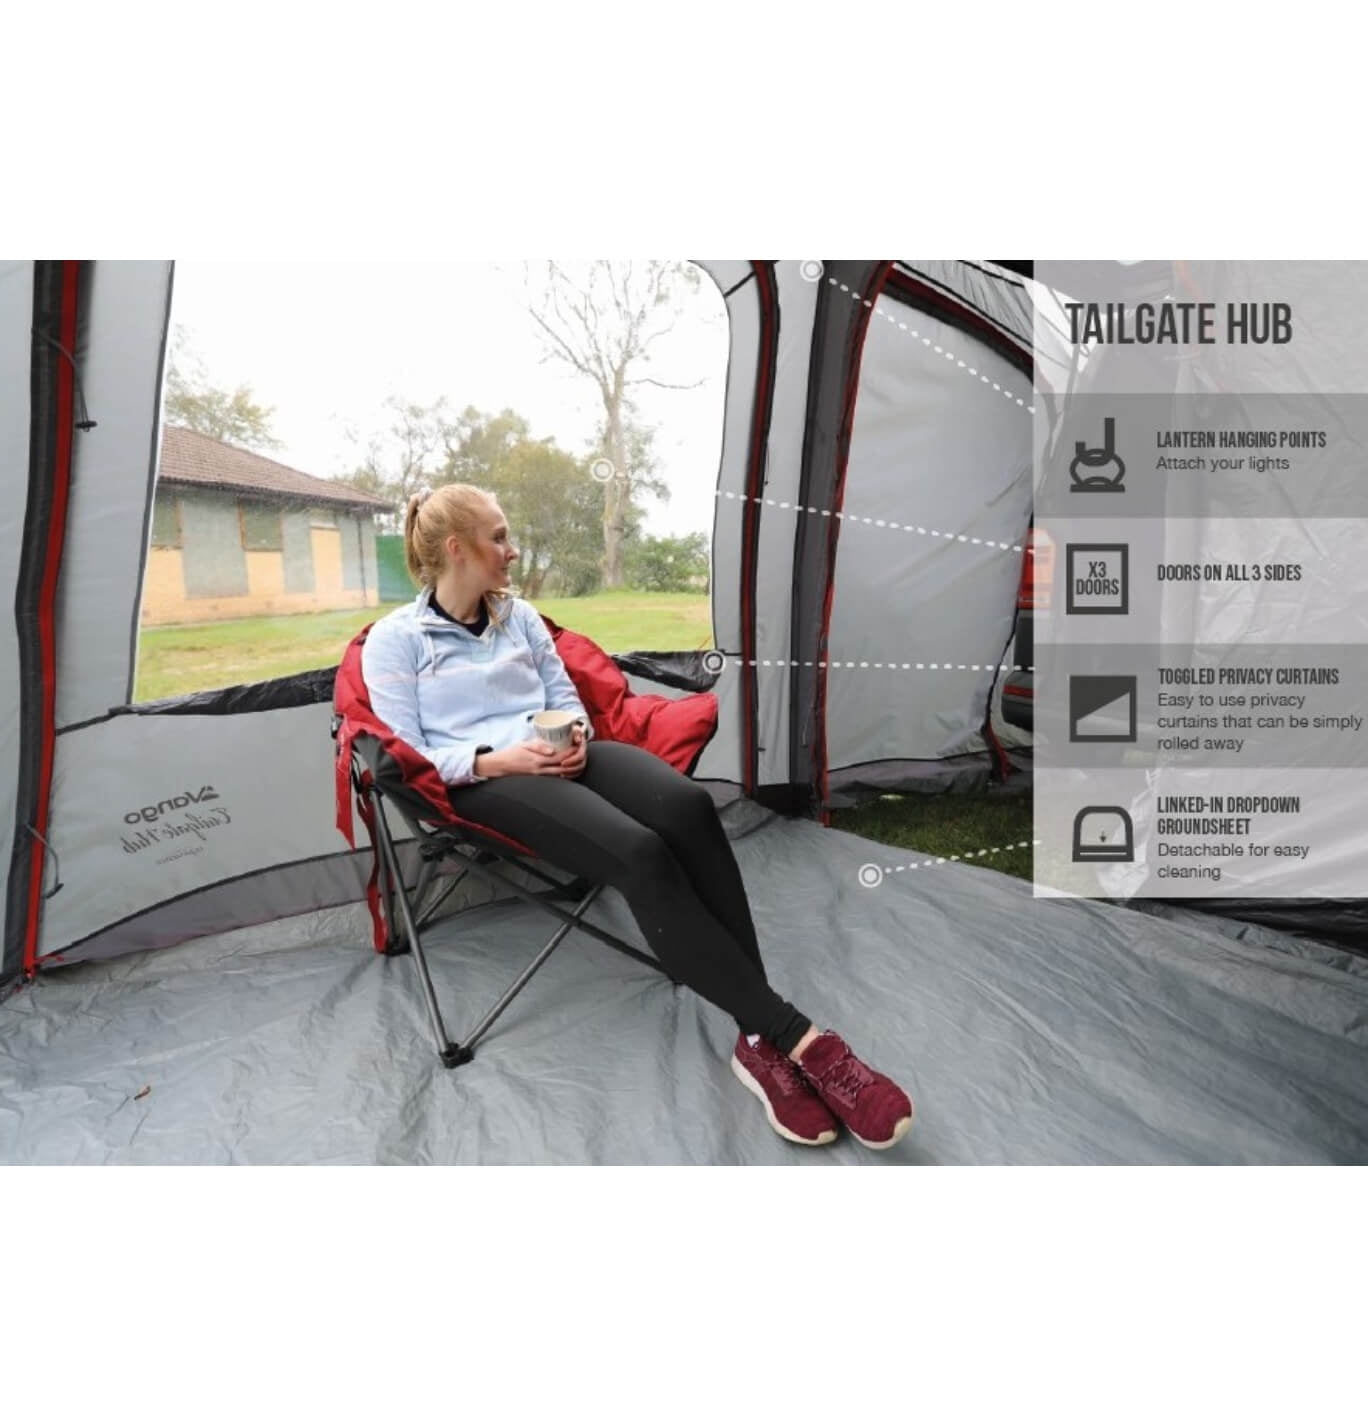 Indoor features of the tailgate hub with someone sitting in the tent